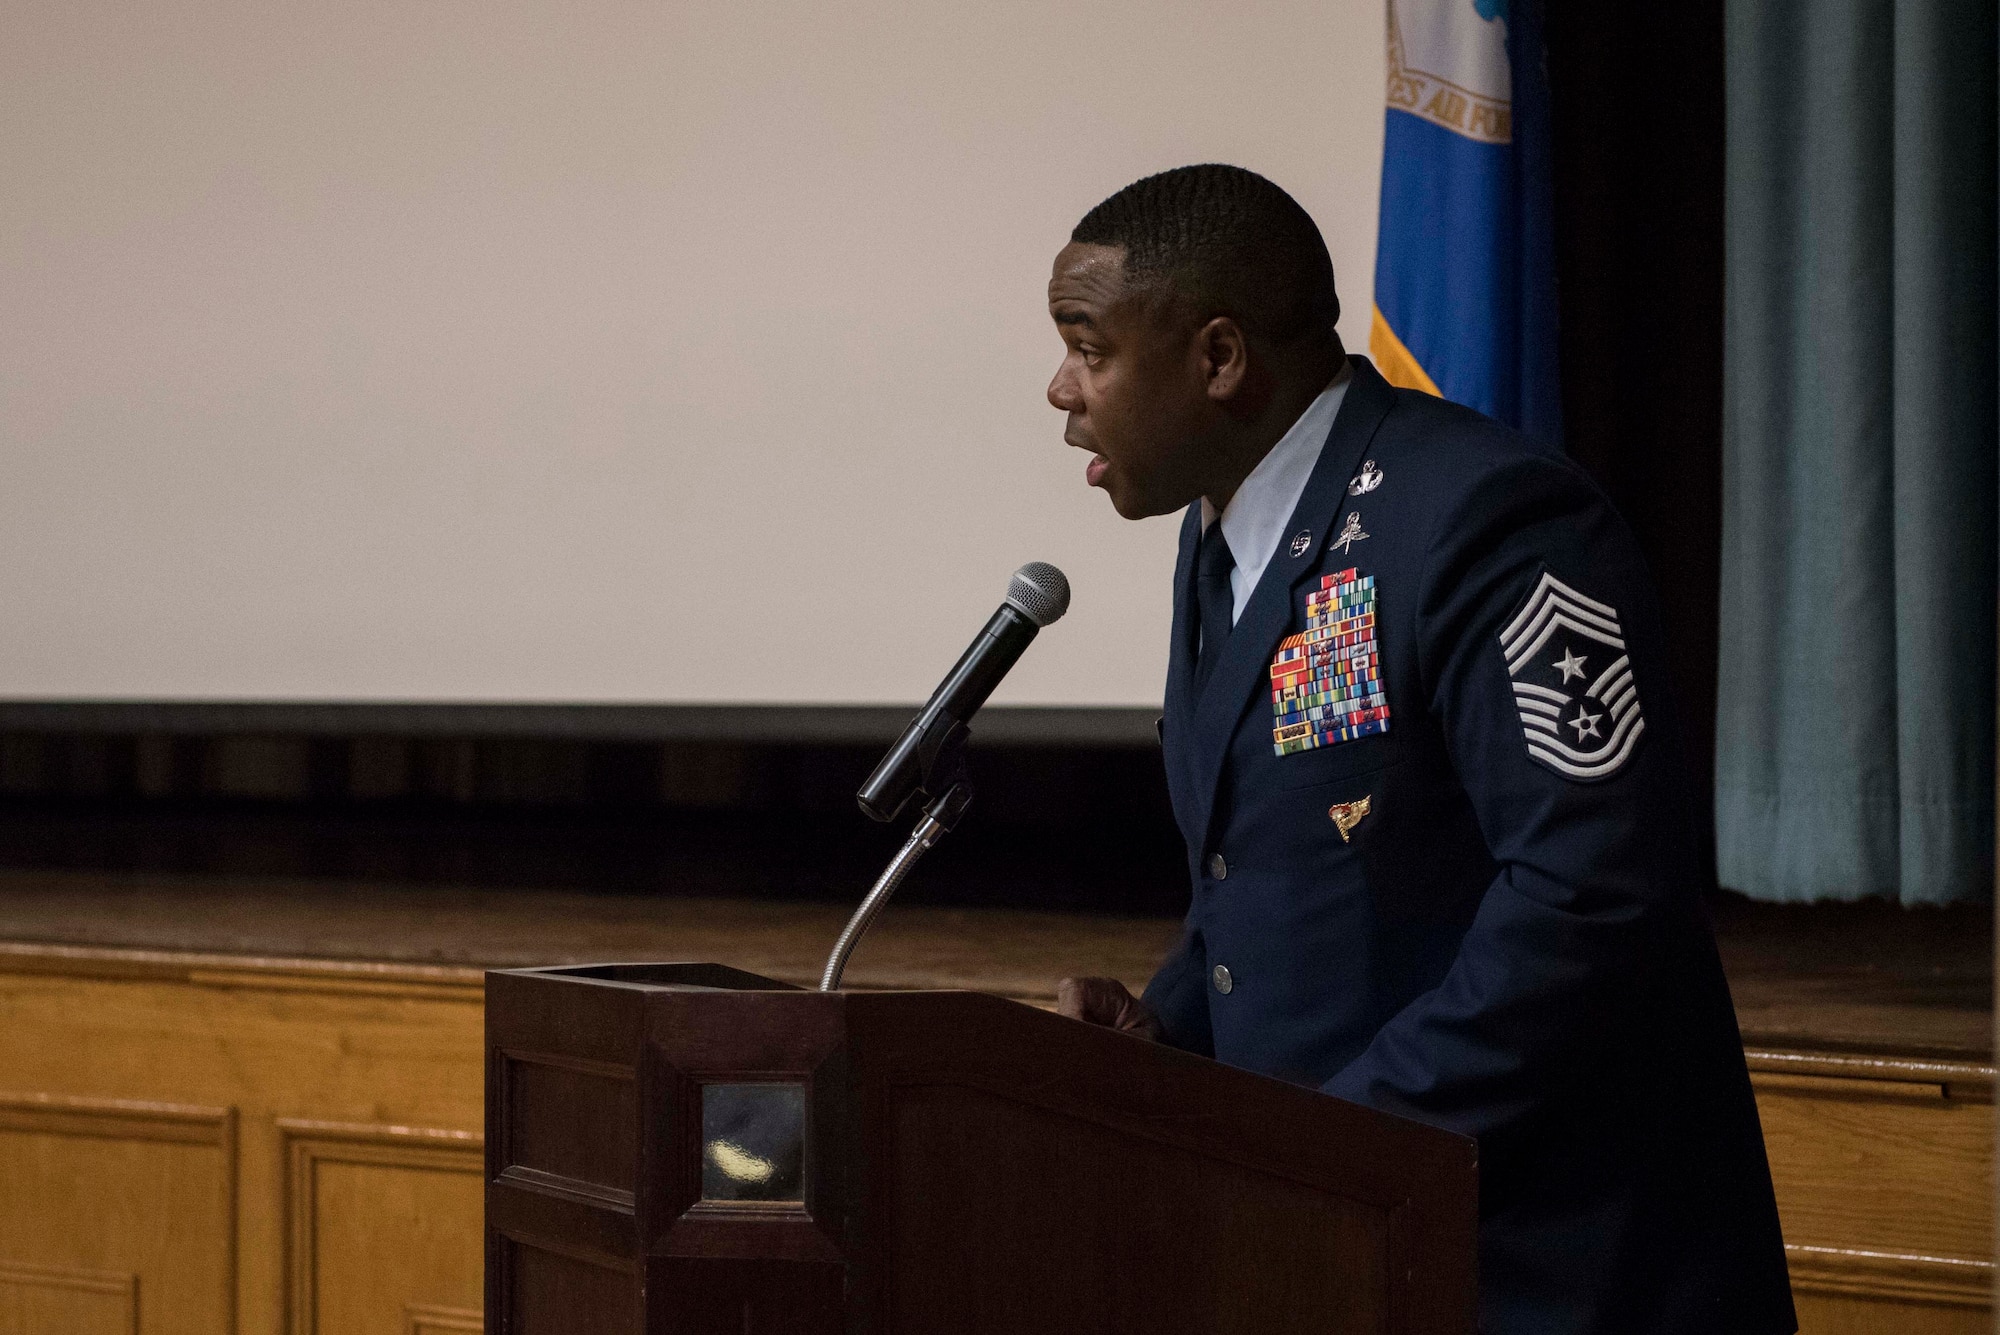 Chief Master Sgt. Robert L. Zackery III, 47th Flying Training Wing command chief master sergeant, gives his advice to 18 Tactical Air Control Party (TACP) candidates preparing to graduate at Joint Base San Antonio-Lackland, Texas, Dec. 13, 2019. The Special Warfare Training Wing graduates Combat Control, Special Reconnaissance, Pararescue and TACP Airmen – whose mission is to conduct global combat operations in contested, denied, and austere areas under any environmental conditions.(U.S. Air Force photo by Senior Airman Marco A. Gomez)